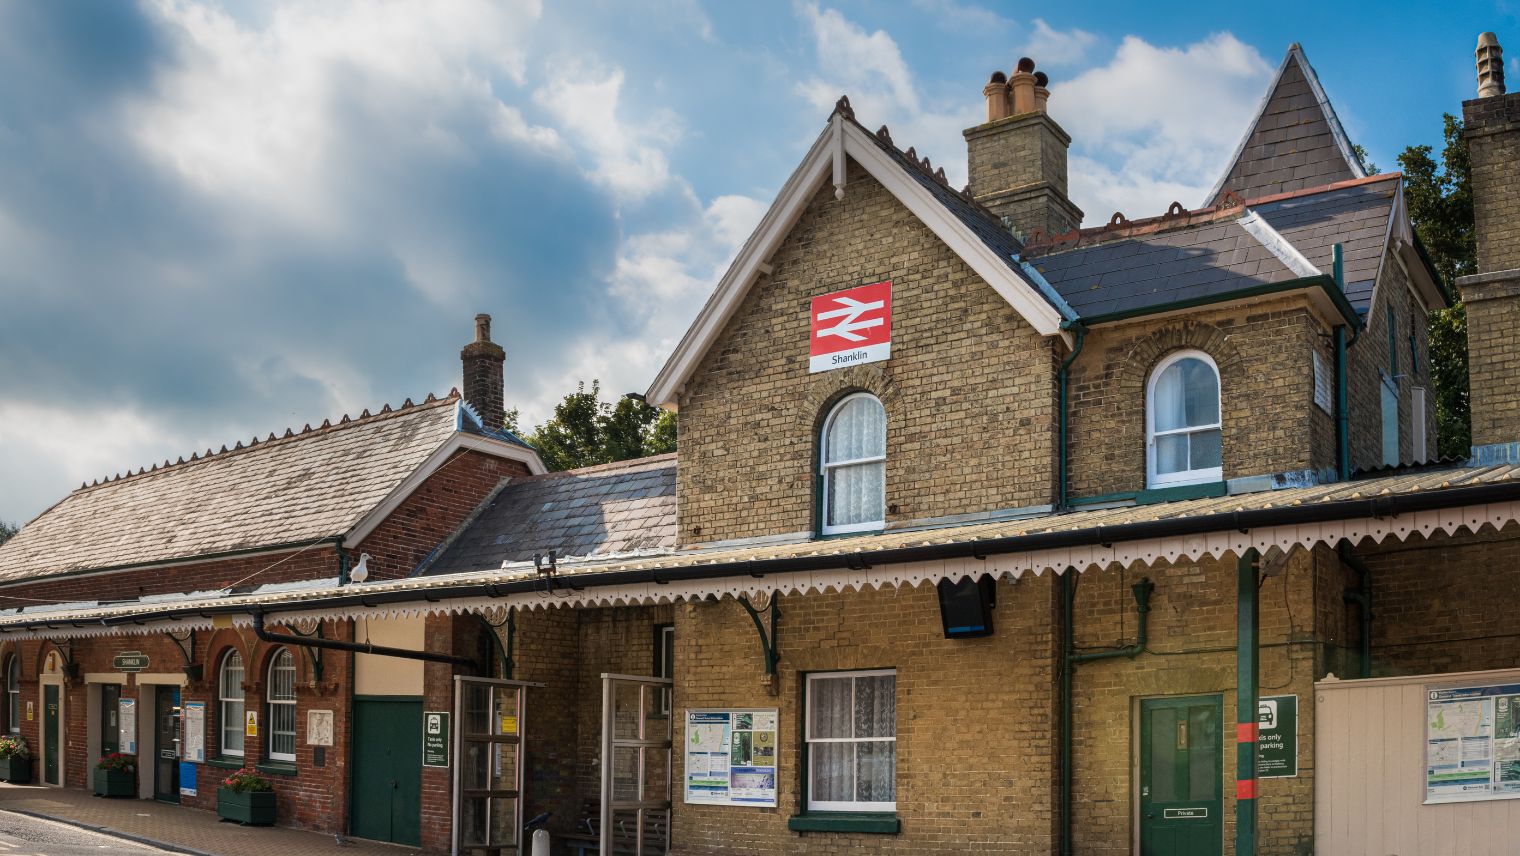 Shanklin station on SWR’s Island Line on the Isle of Wight won ‘Station of the Year – Small’ at the National Rail Awards